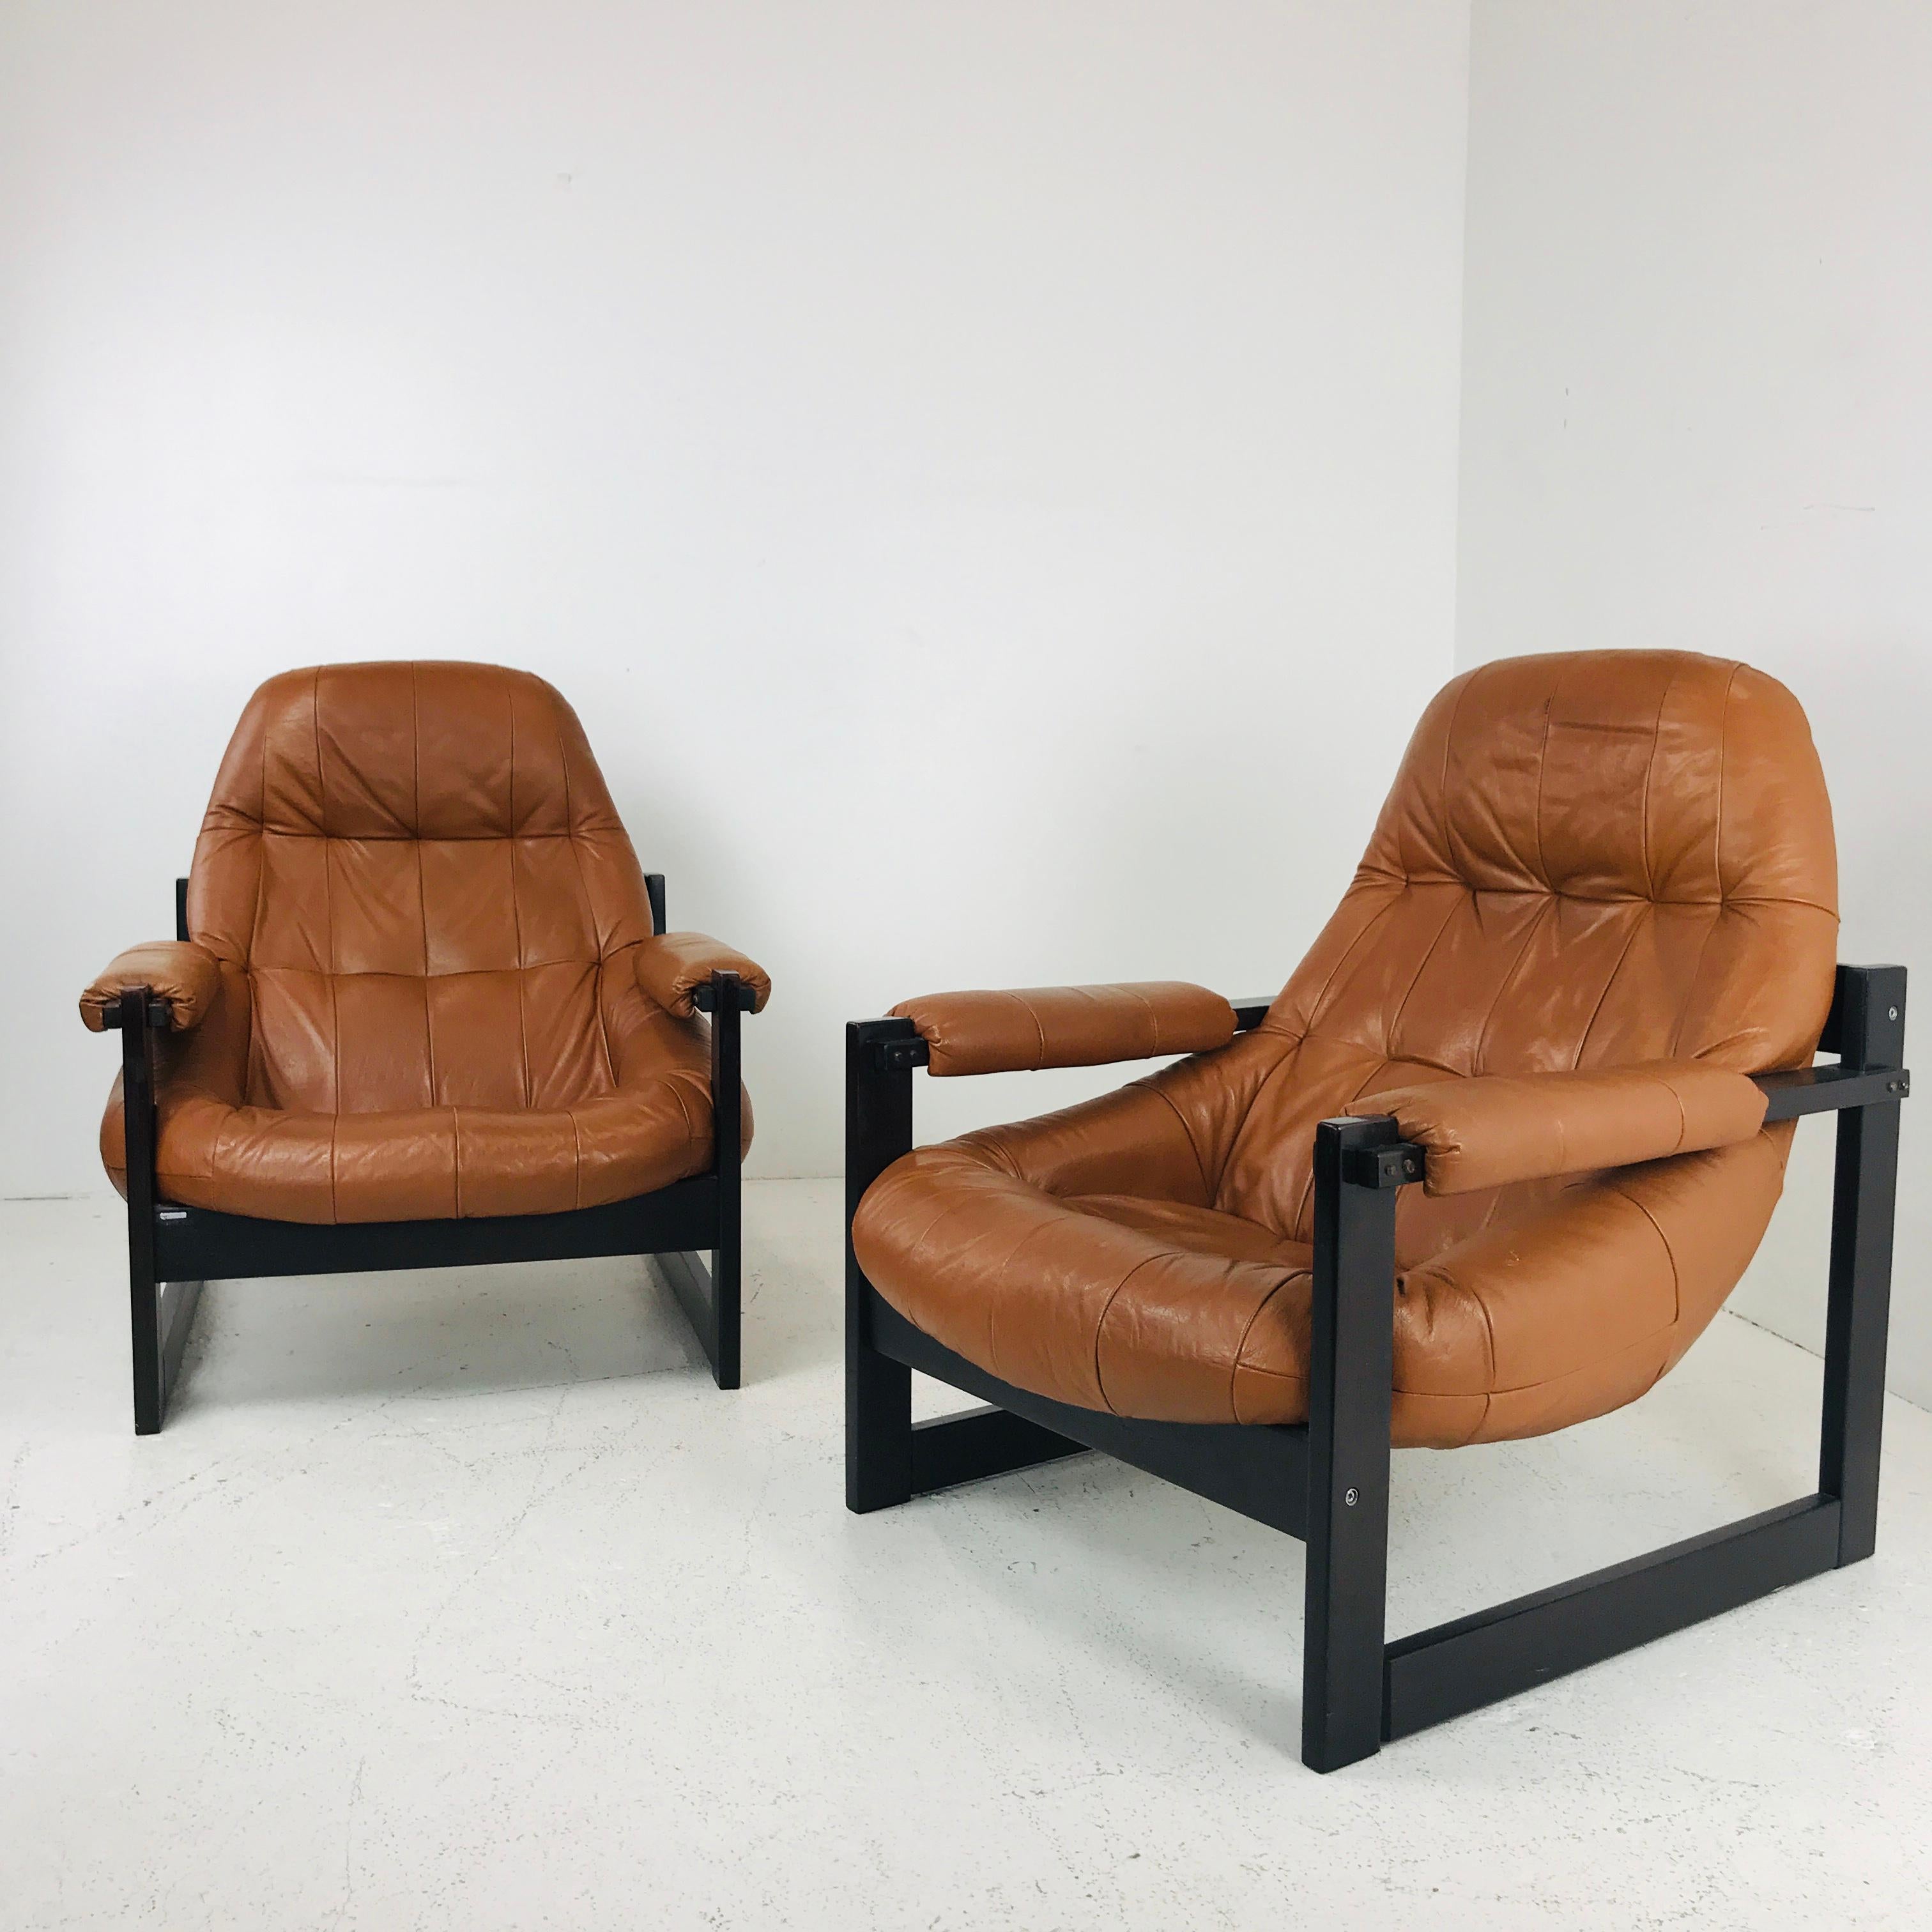 percival leather chair